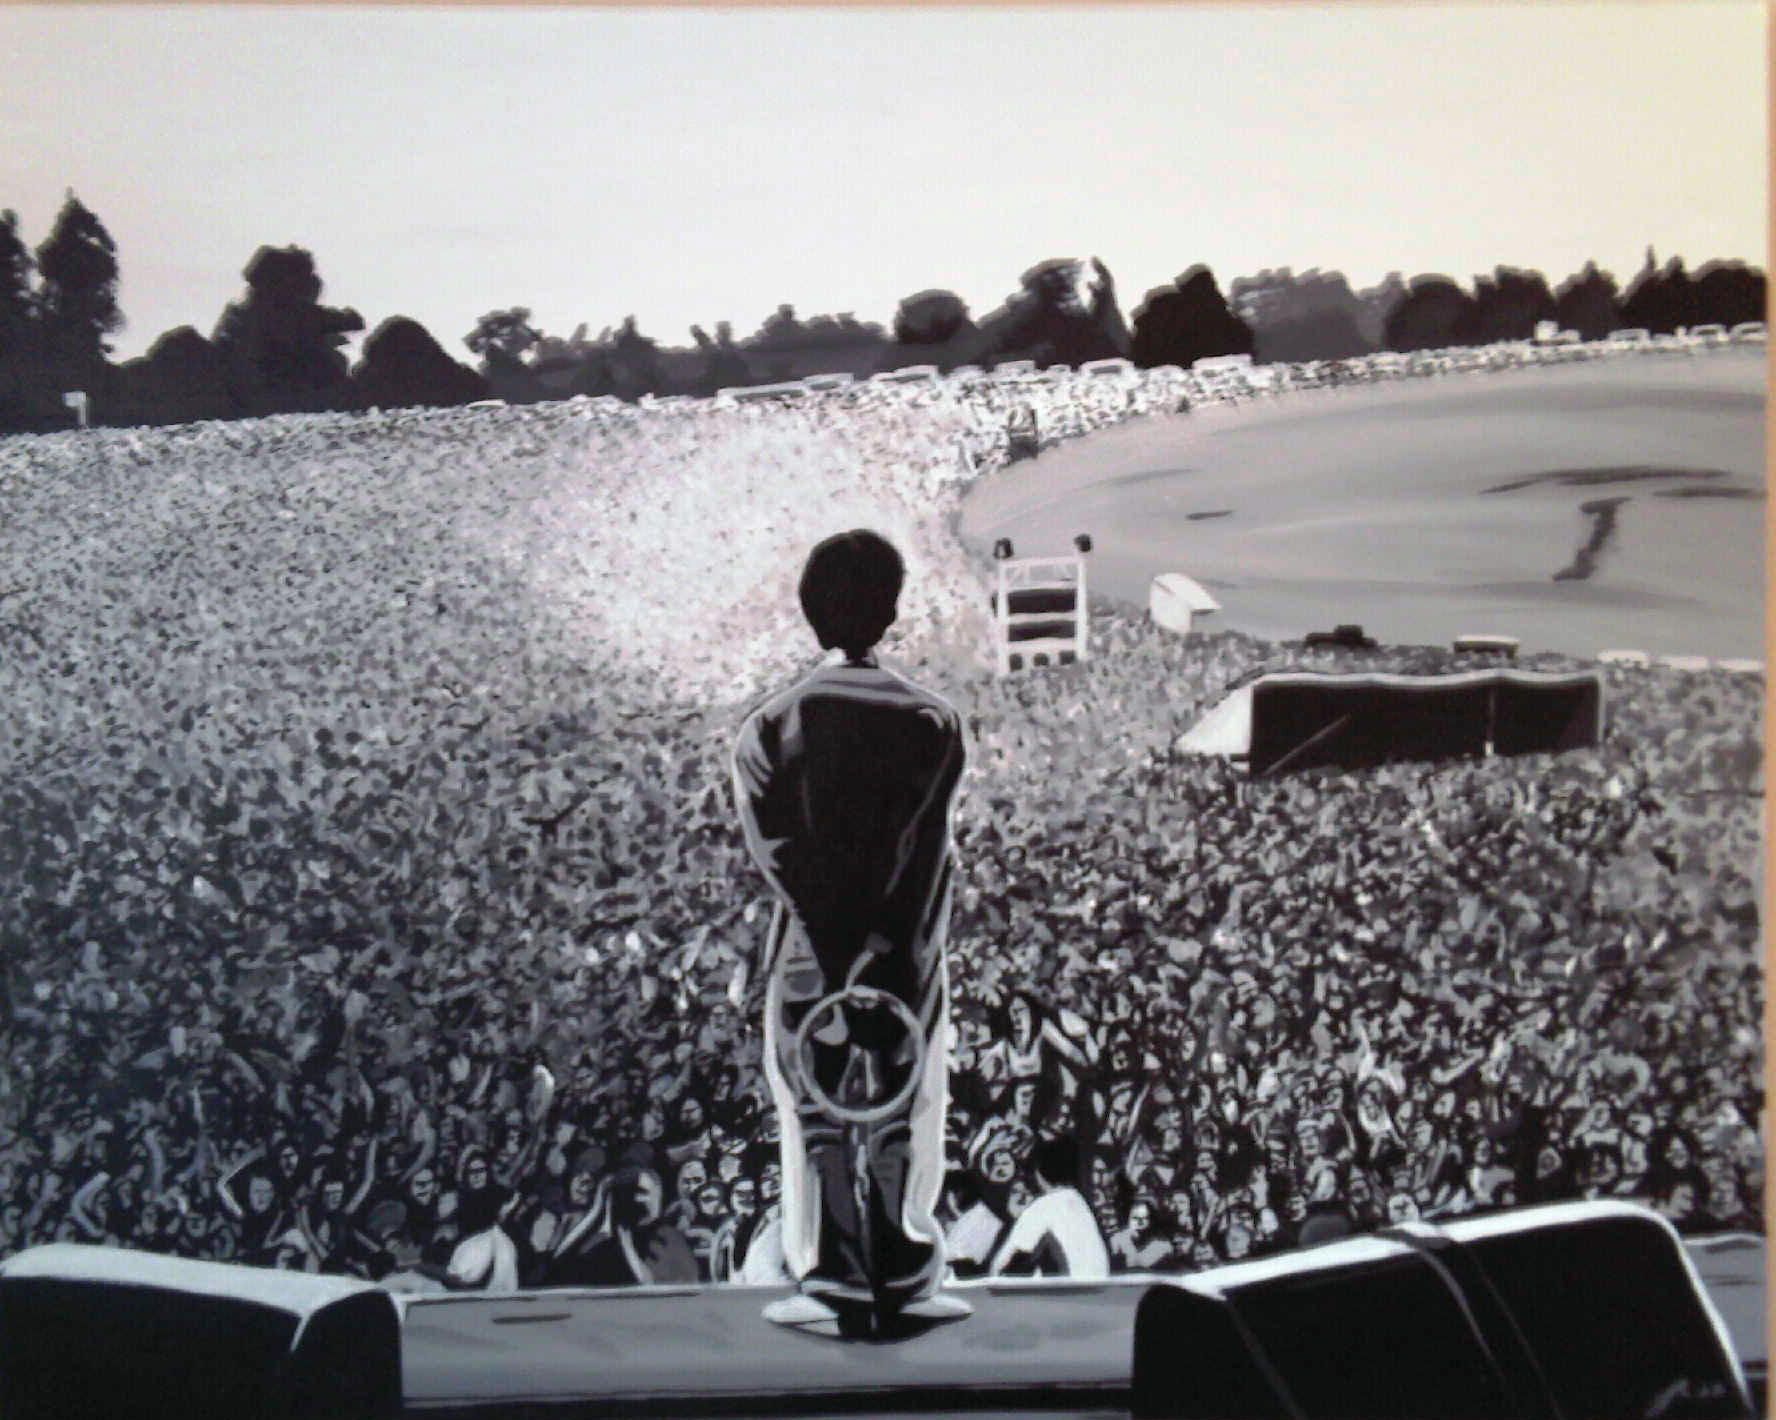 Free download oasis knebworth by purposemaker [1776x1420]